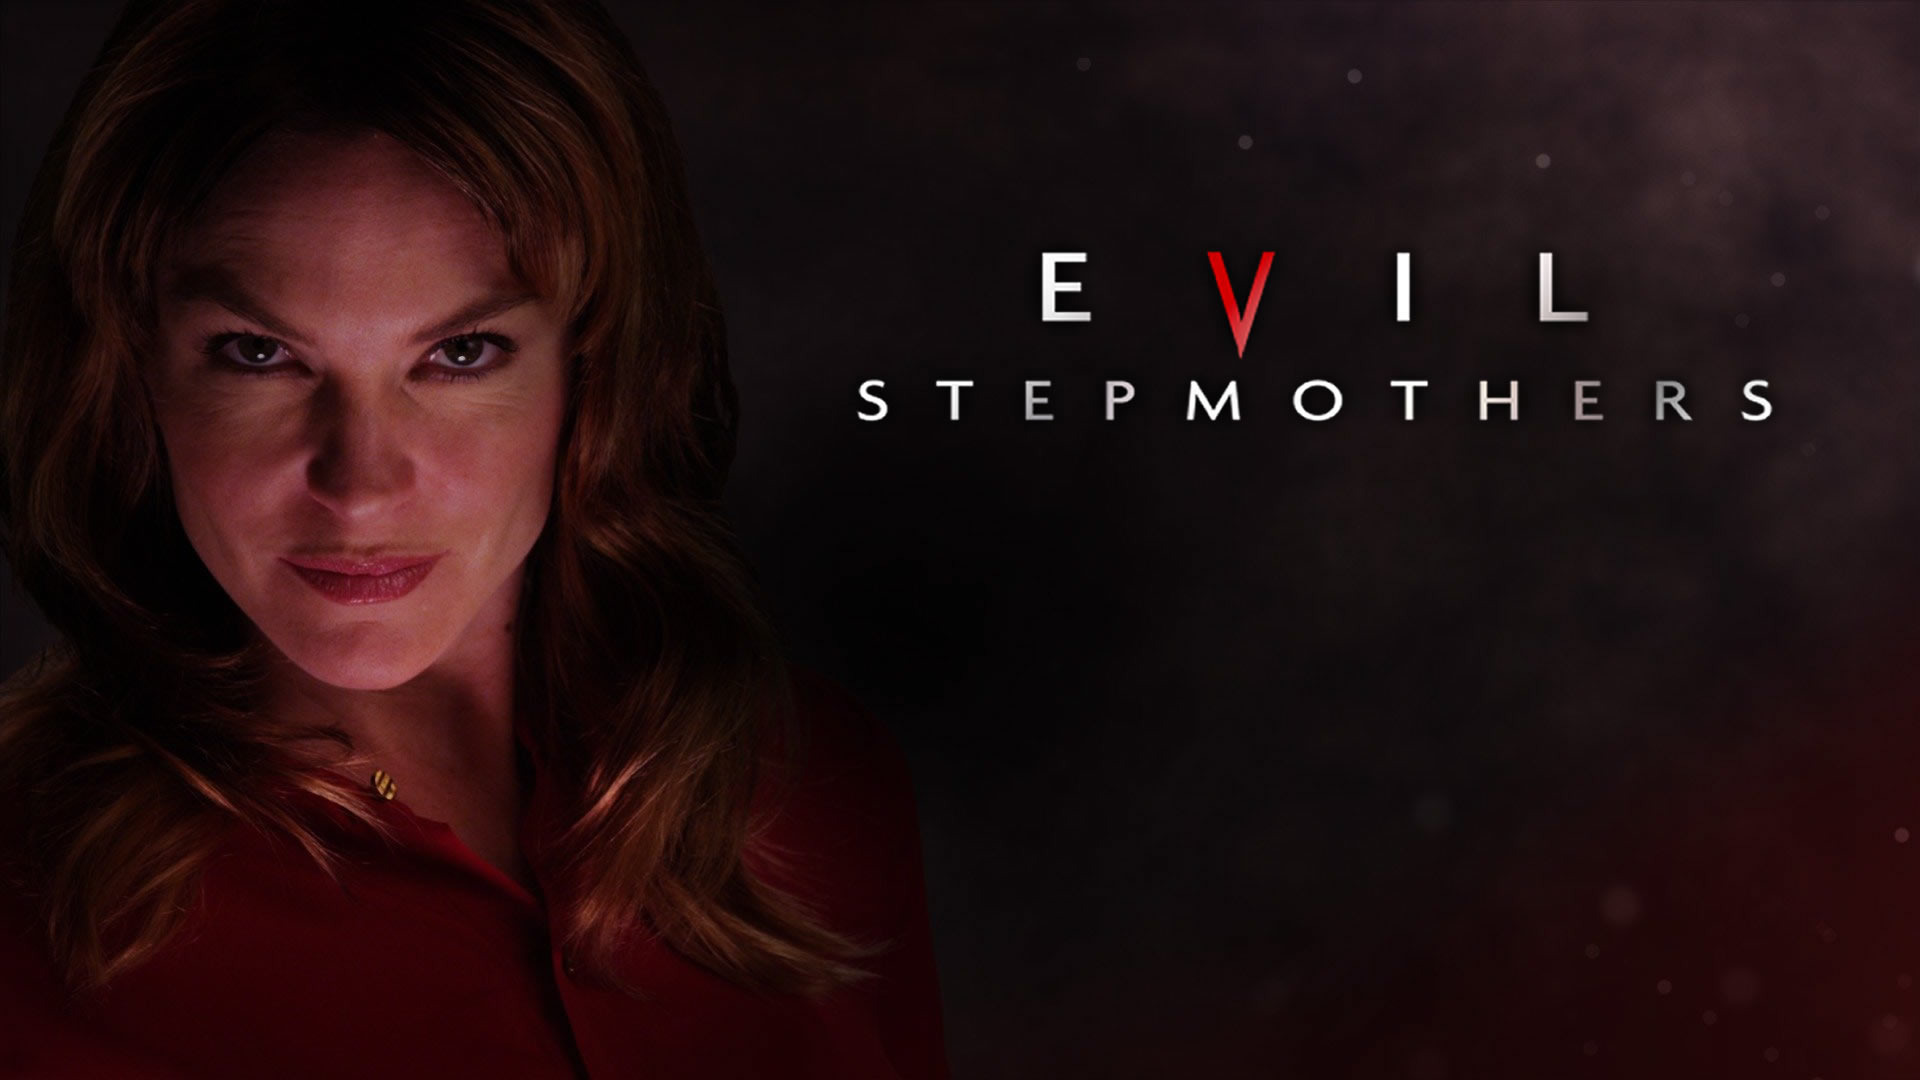 Show Evil Stepmothers